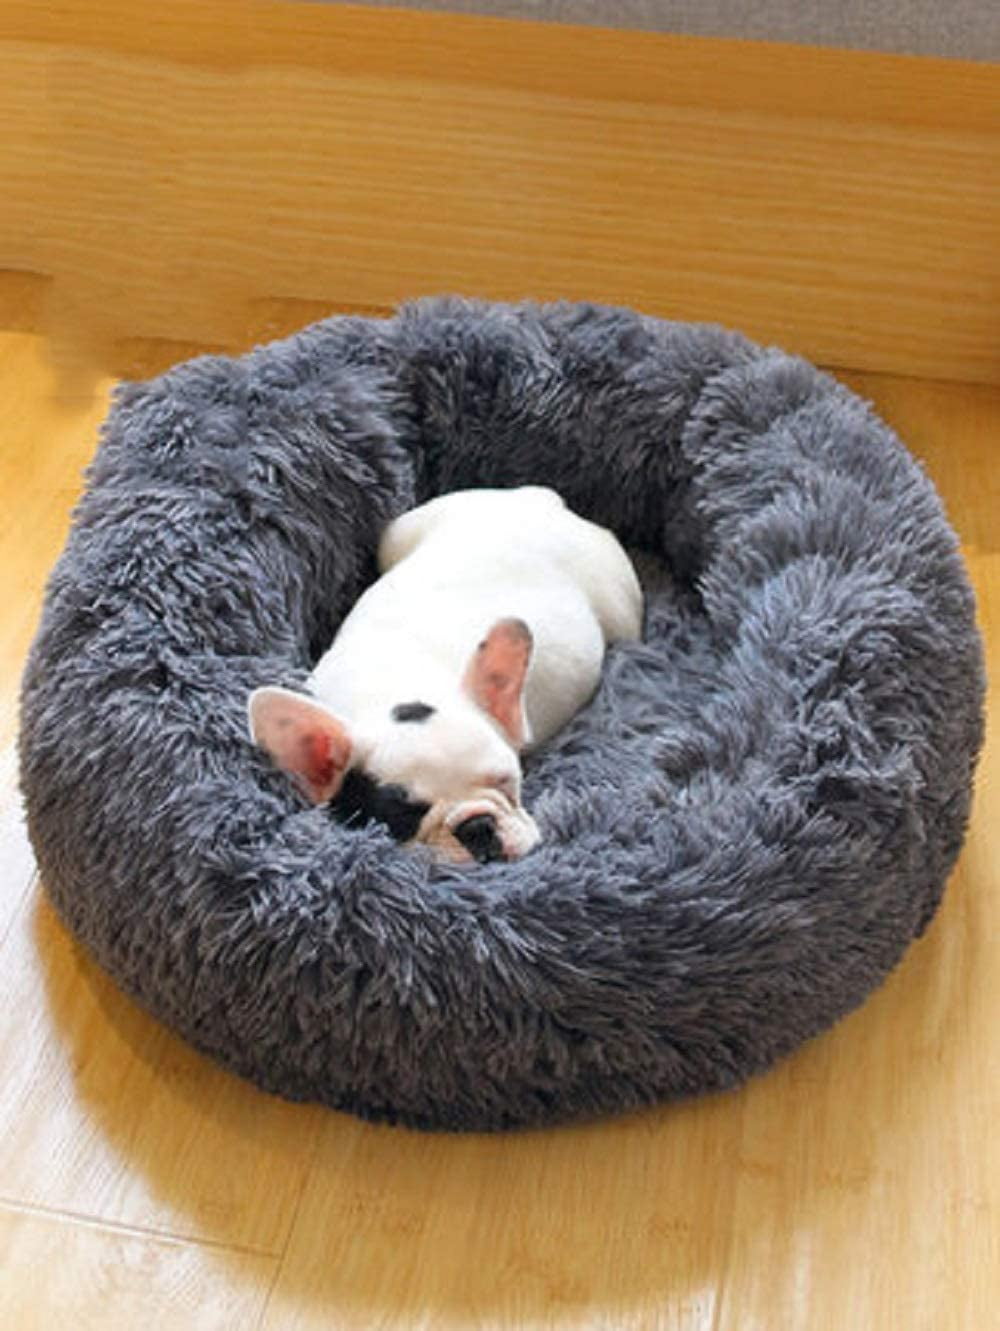 Dog Bed Cat Bed Calming Dog Bed nest Extra Soft Comfortable Cute,Cat Cushion Bed Washable,Round Dog Bed Suitable for Cats and Small Medium Dogs（70cm/27.5in Diameter）